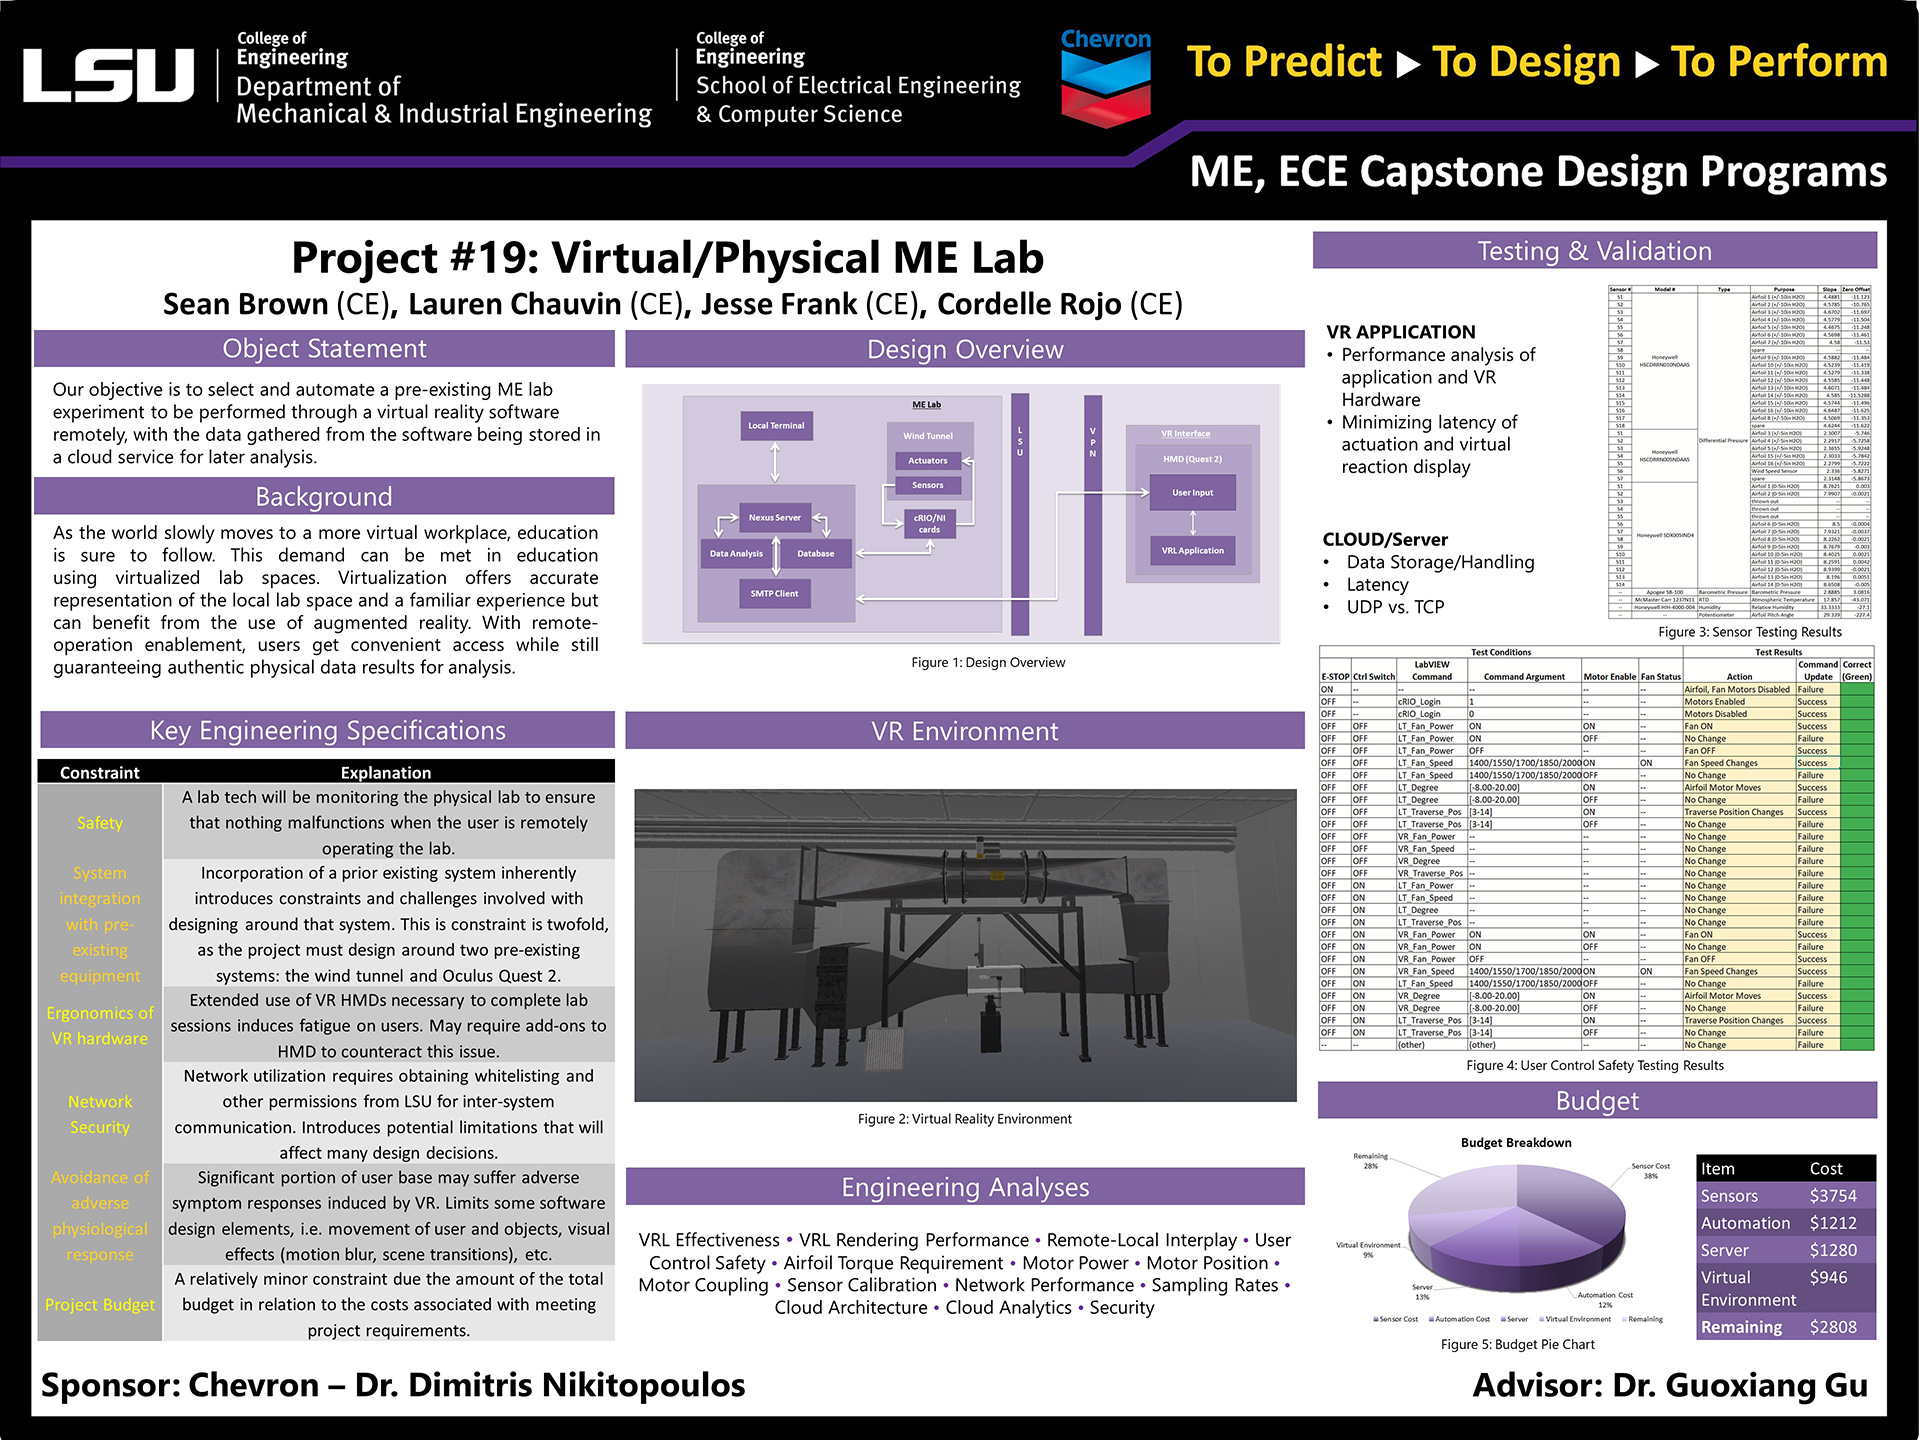 Project 19: Virtual-Physical ME Lab (2022)